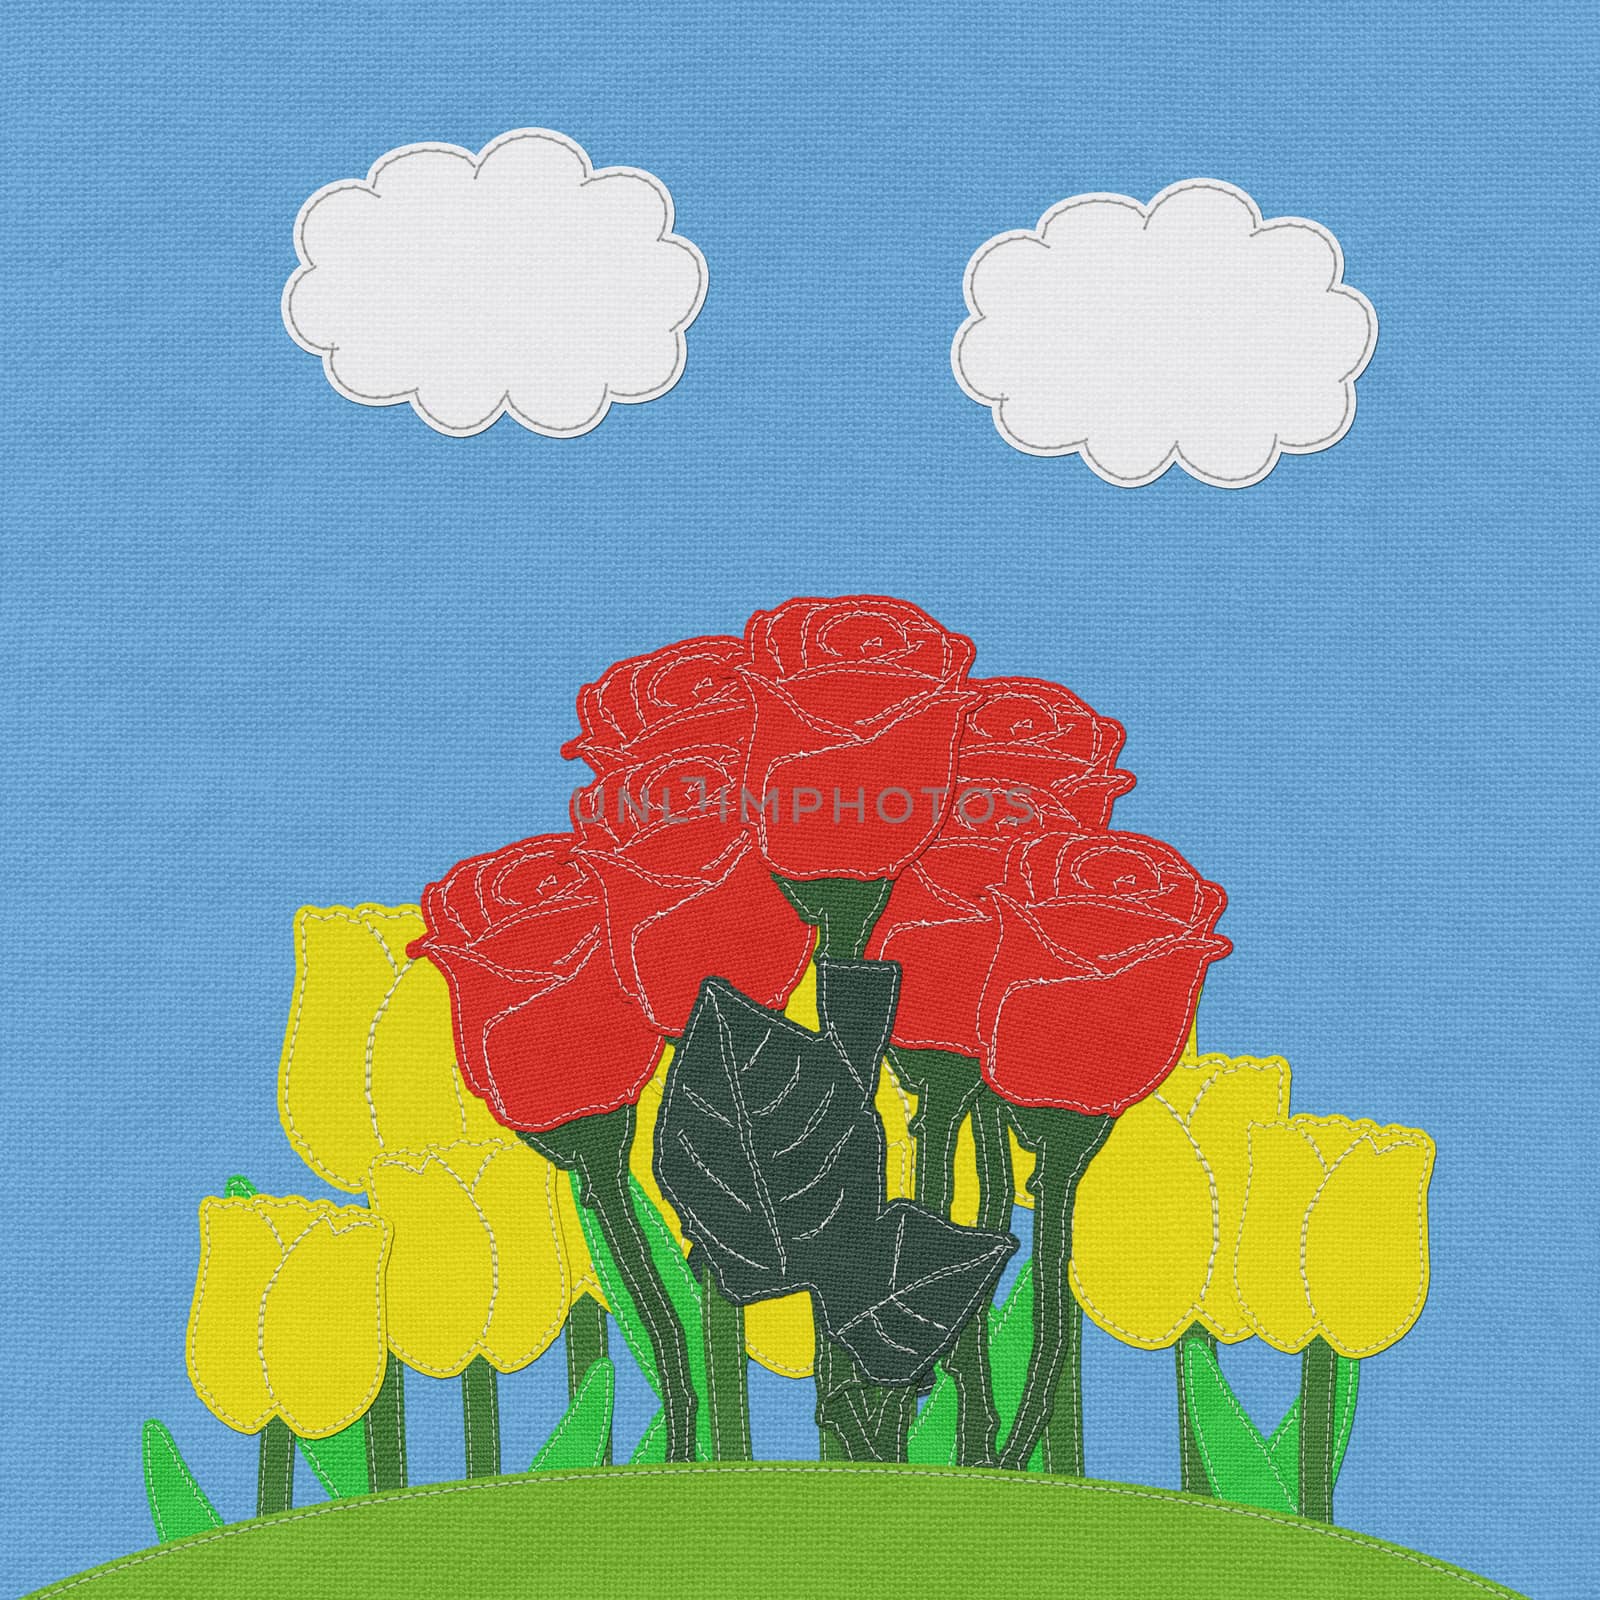 Red rose on green grass field with stitch style fabric backgroun by basketman23